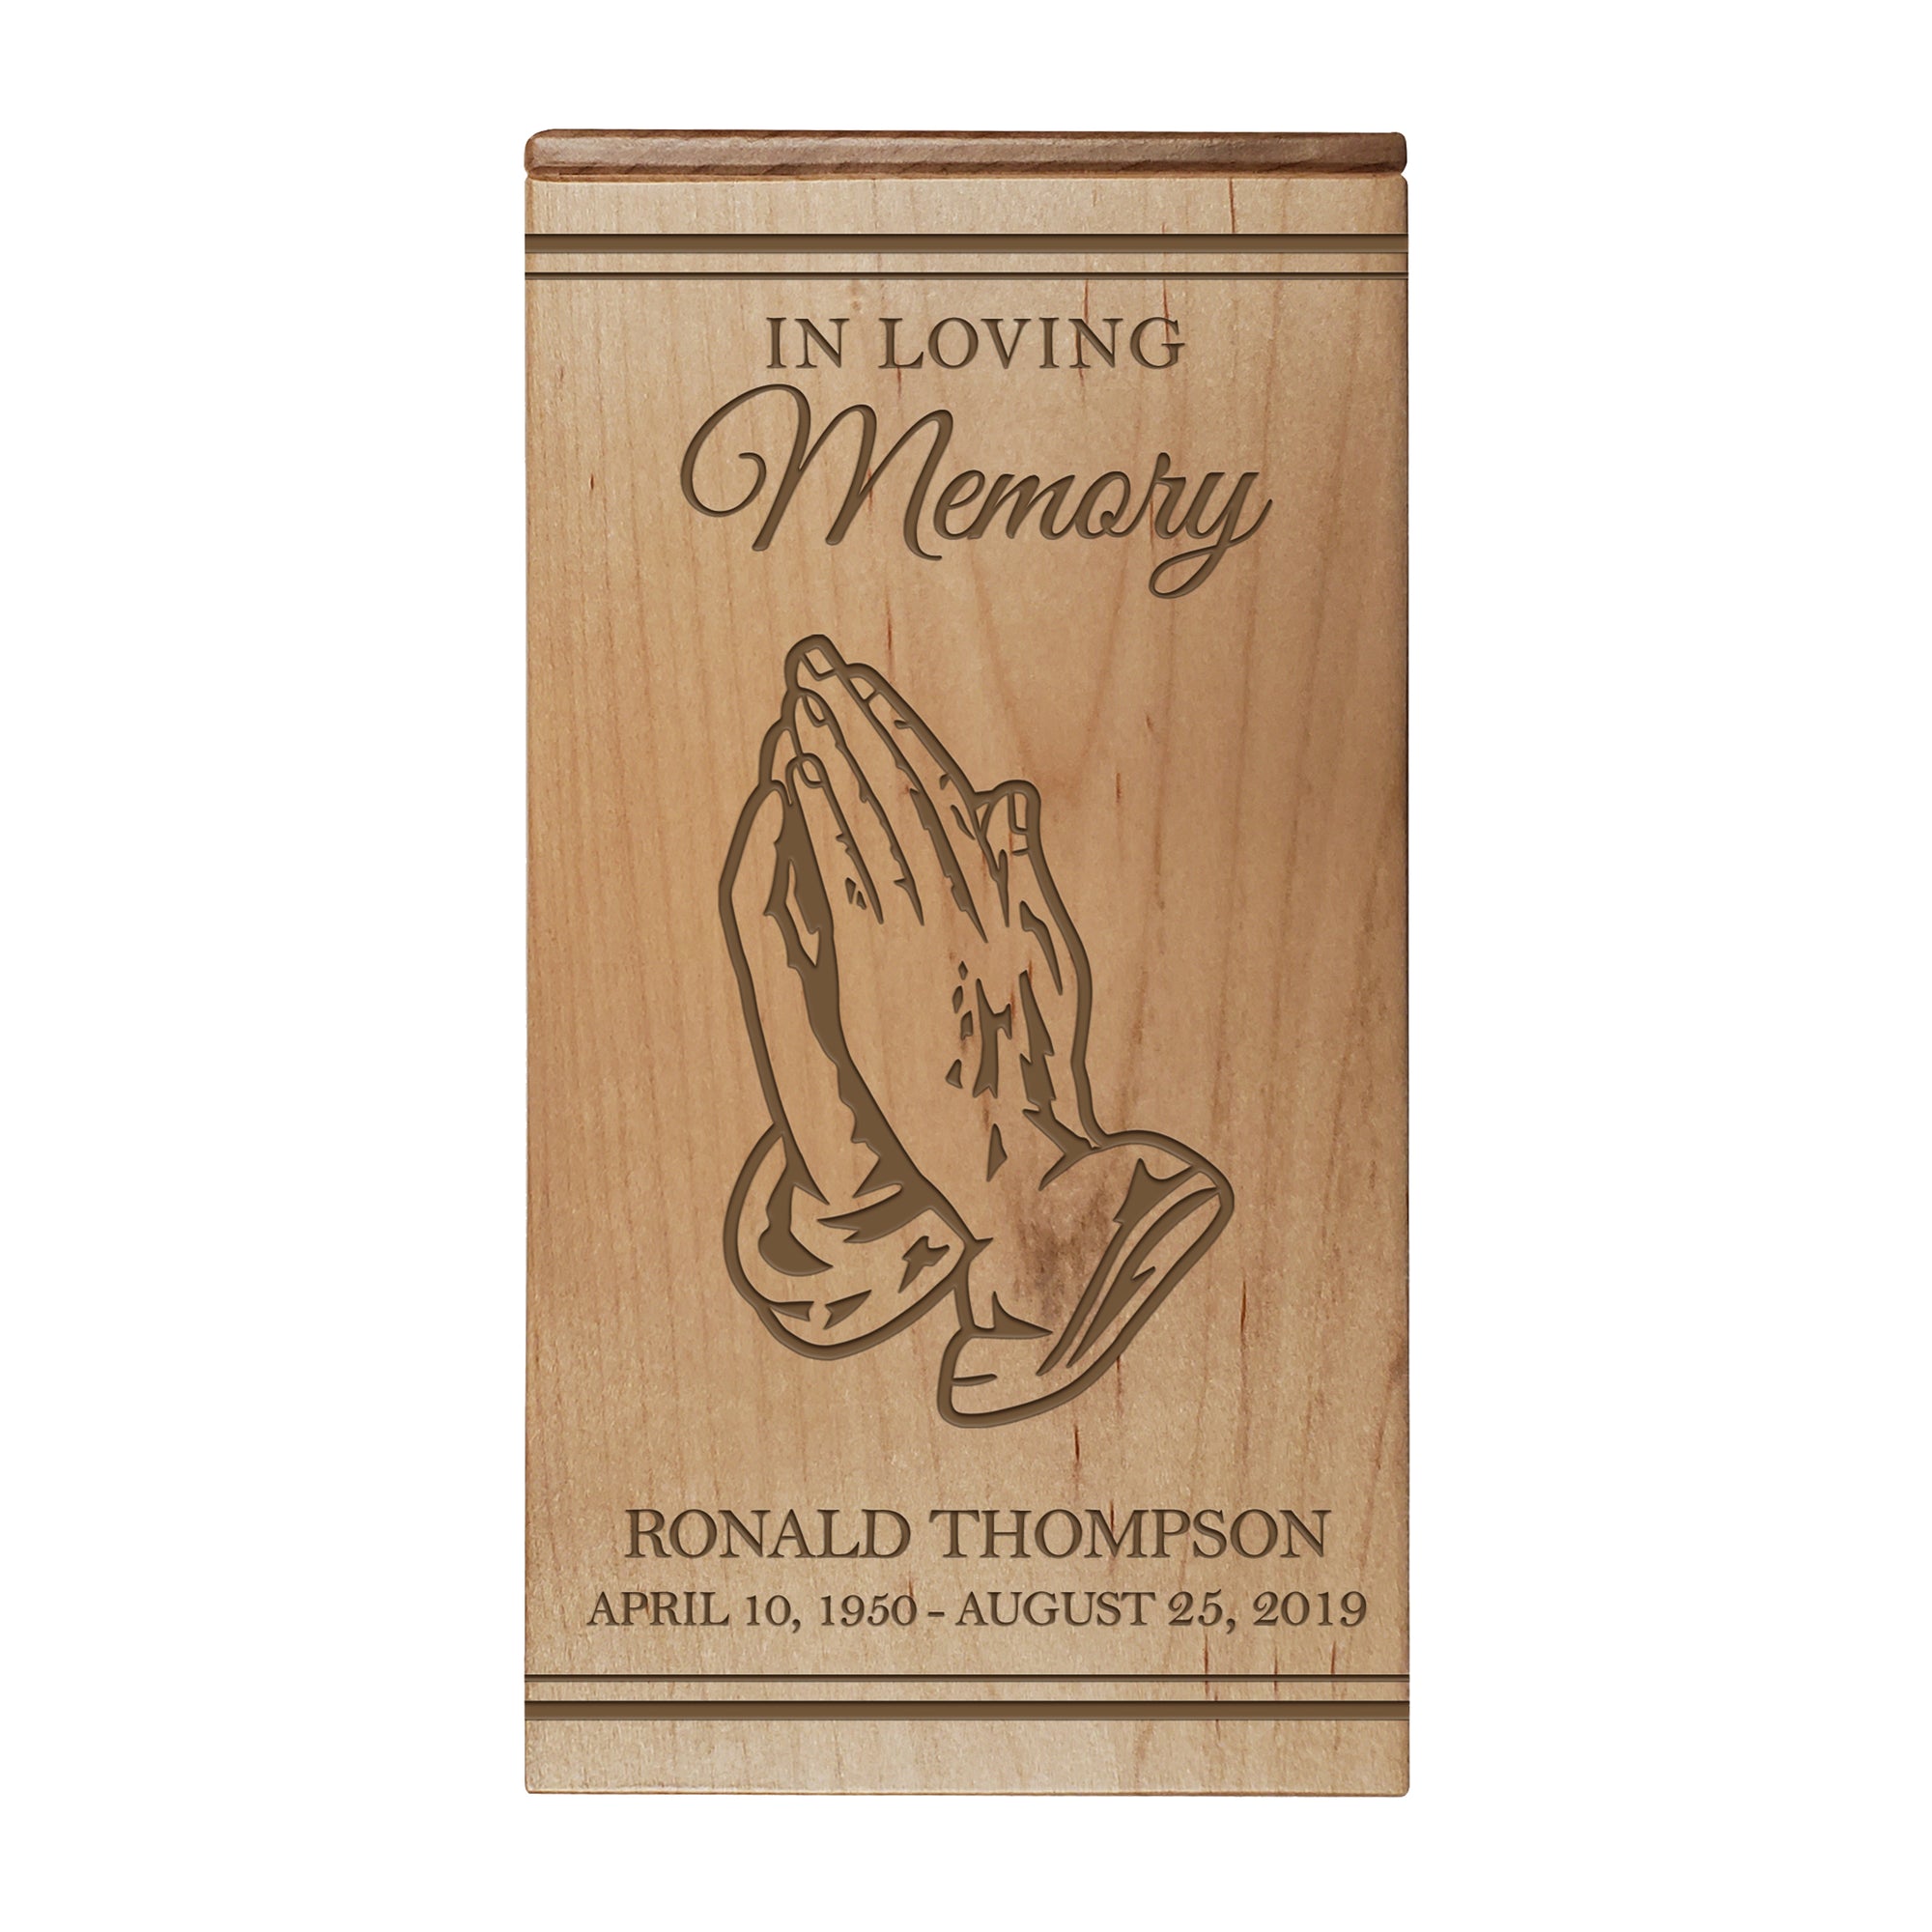 LifeSong Memorials Custom Engraved Memorial Cremation Keepsake Urn Box 4.5x8.875in Holds 100 Cu Inches Of Human Ashes In Loving Cross (Hands). Sympathy Gift for the Loss of a Loved One Bereavement Gift for Family Friends Condolence Sympathy Comfort Keepsake Funeral Decoration. Cremation Urns, urn for ashes, urns for humans, urns for dad, urns for mom, urns for sale, urns for human ashes, pet urns, cherished urns, small urns, small urns for ashes, Wooden Urns, Wooden Keepsake Urn, Wood Cremation Urns.